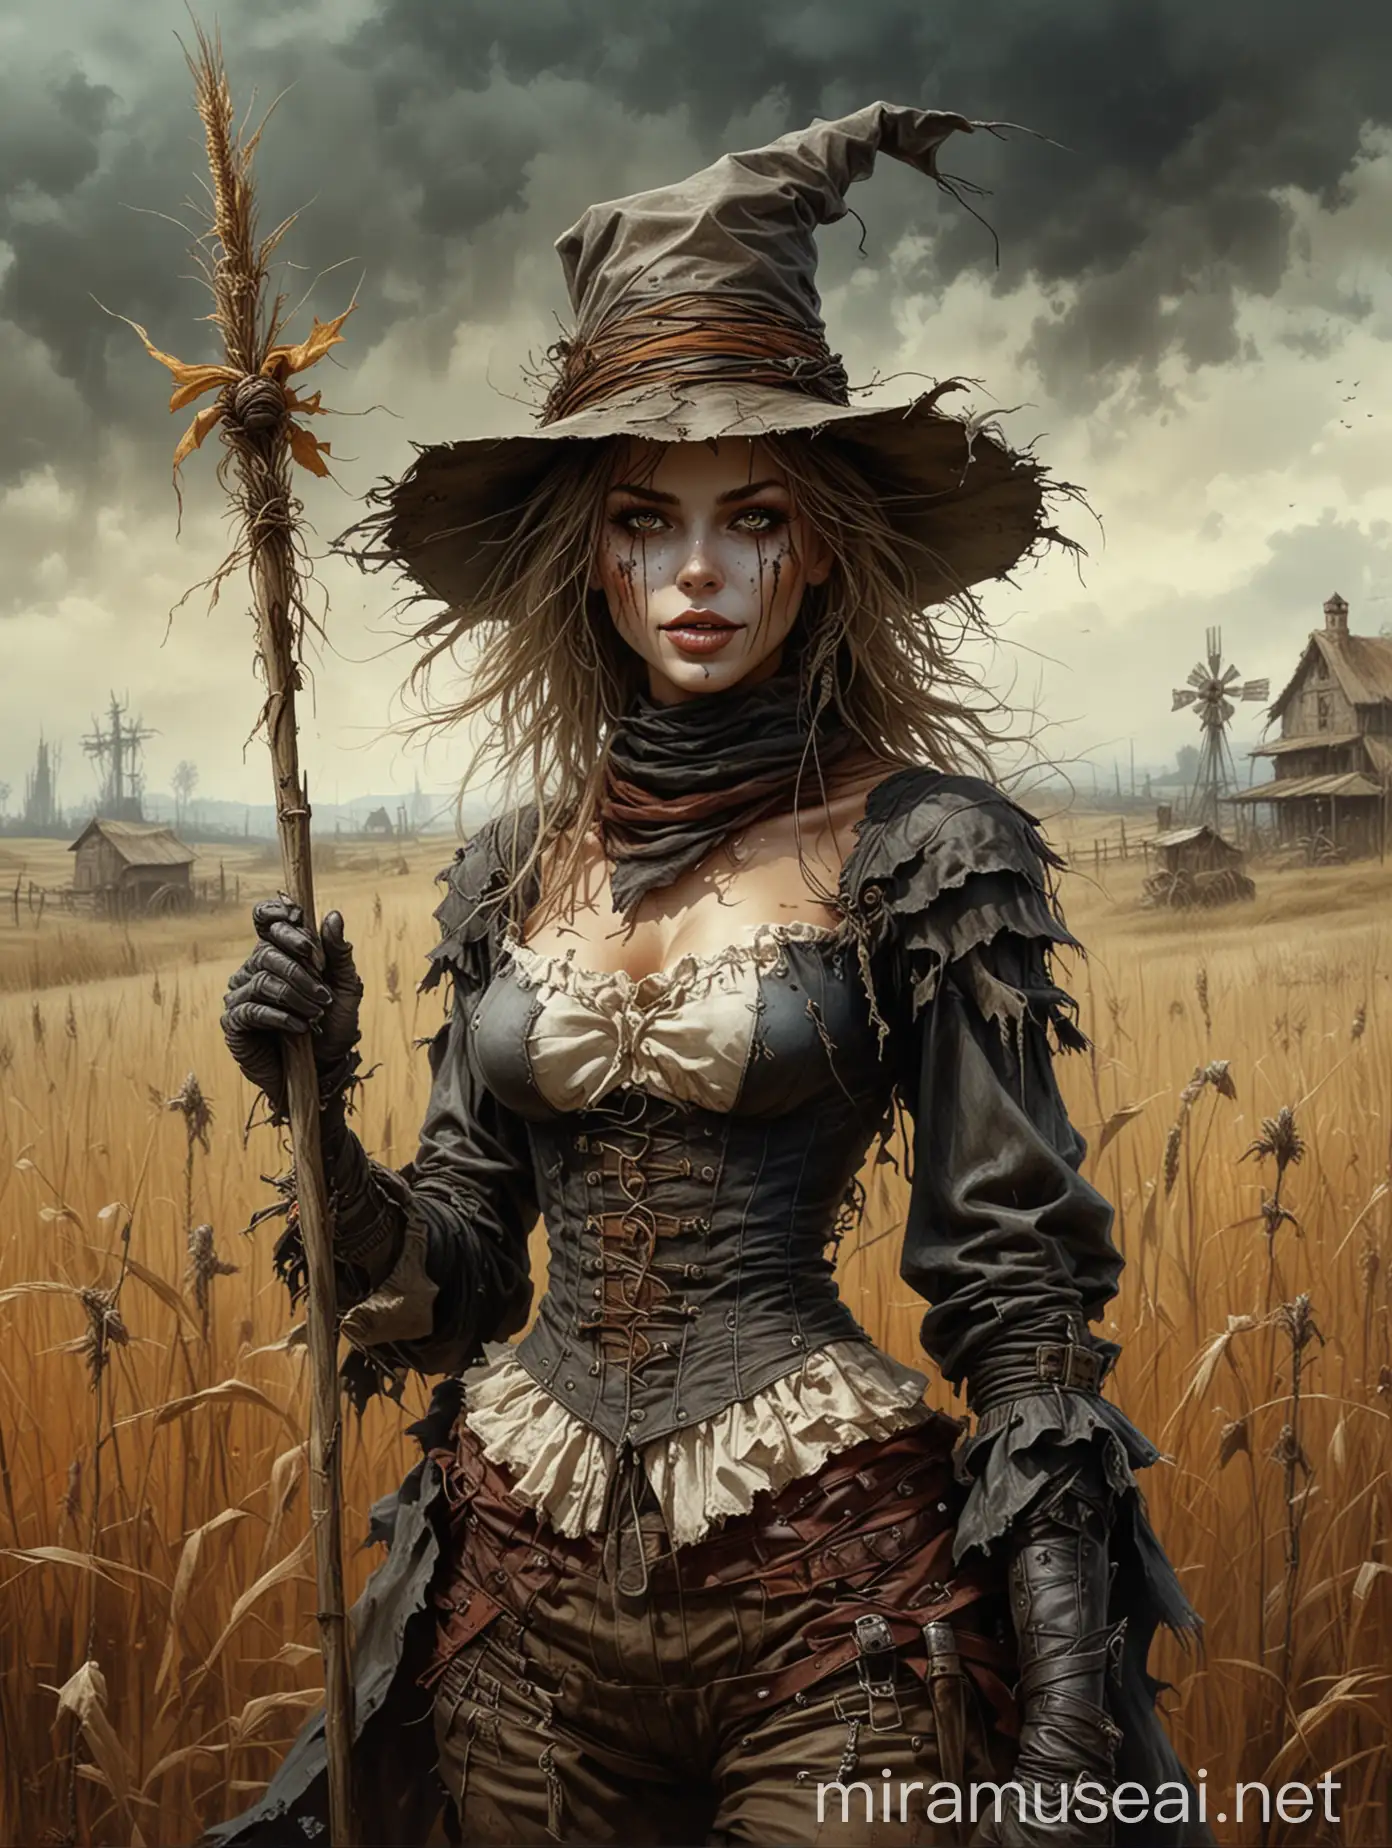 Detailed Dark Fantasy Illustration Beautiful Female Scarecrow in the Field